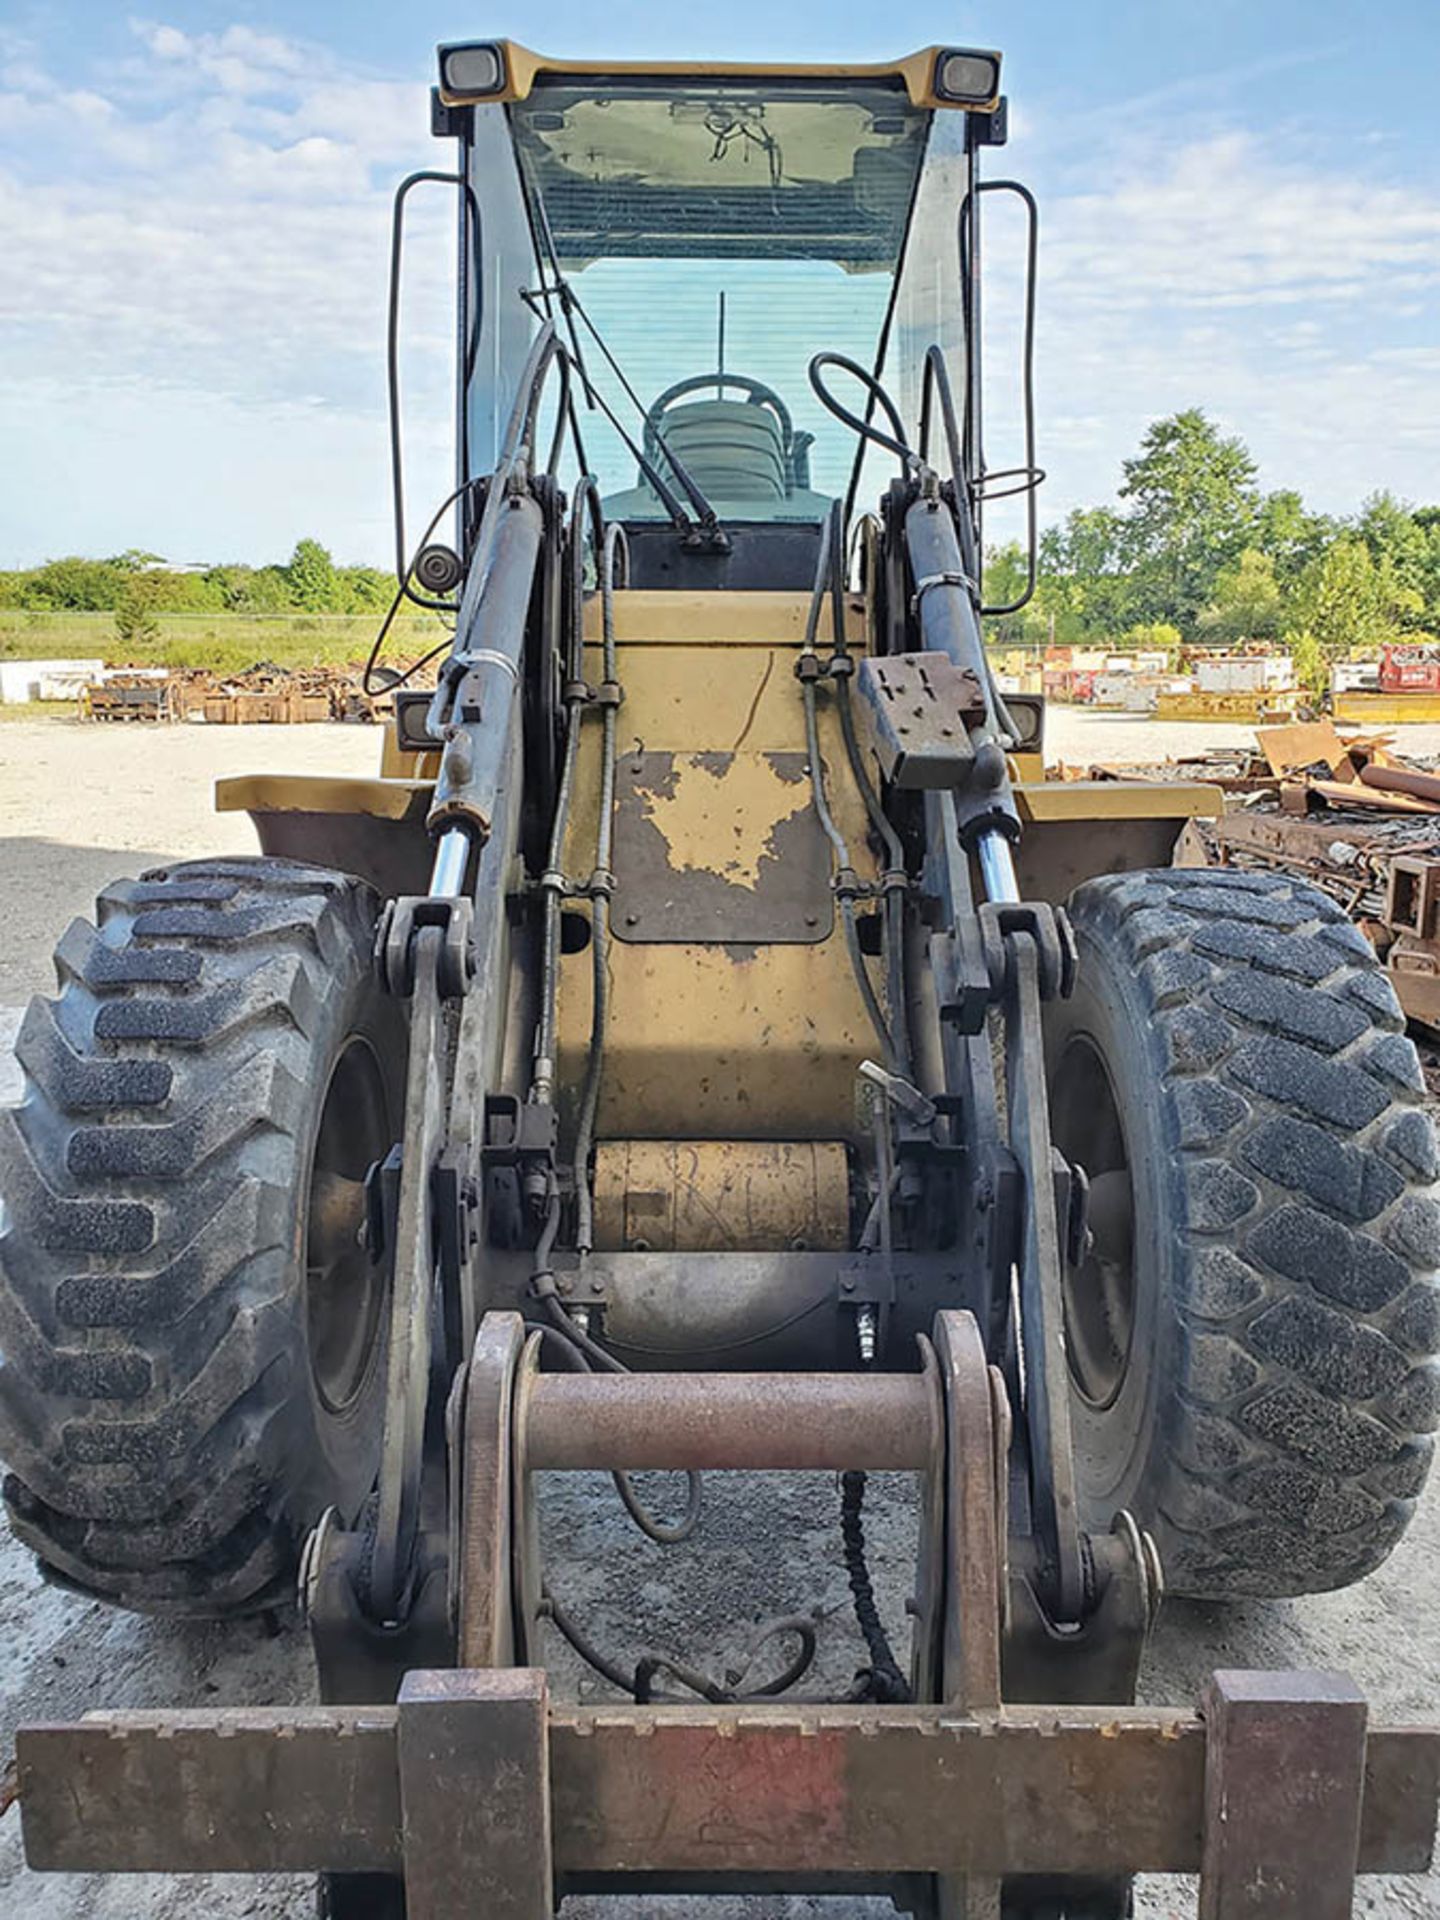 CATERPILLAR IT14G WHEEL LOADER WITH FORKS & BUCKET, PIN 8ZM00195 - Image 2 of 11